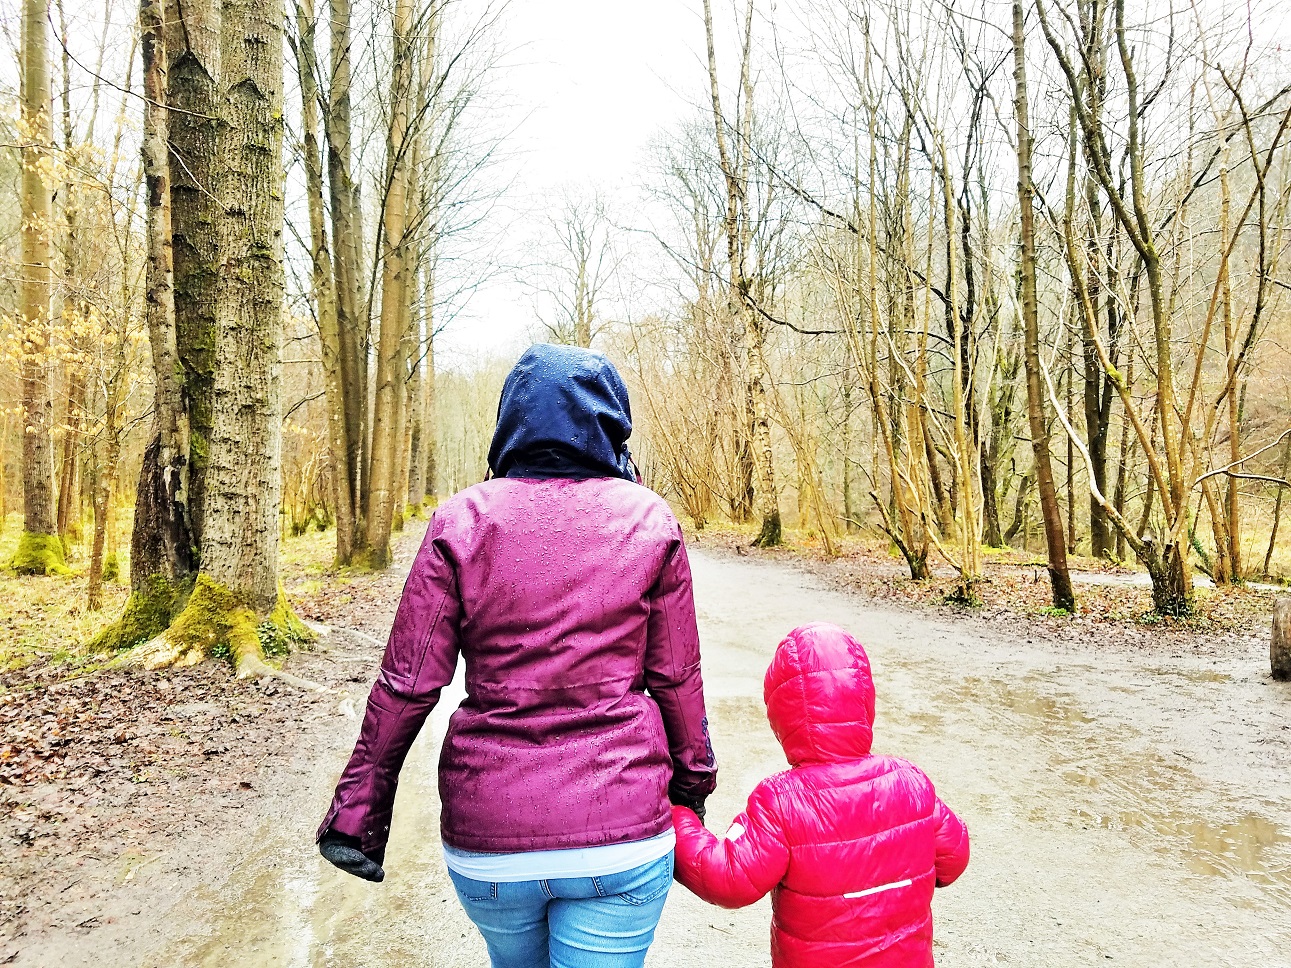 Don't Fall For This Happy Mum Scam - mother holding hands with child in a forest - blogcrush week 60